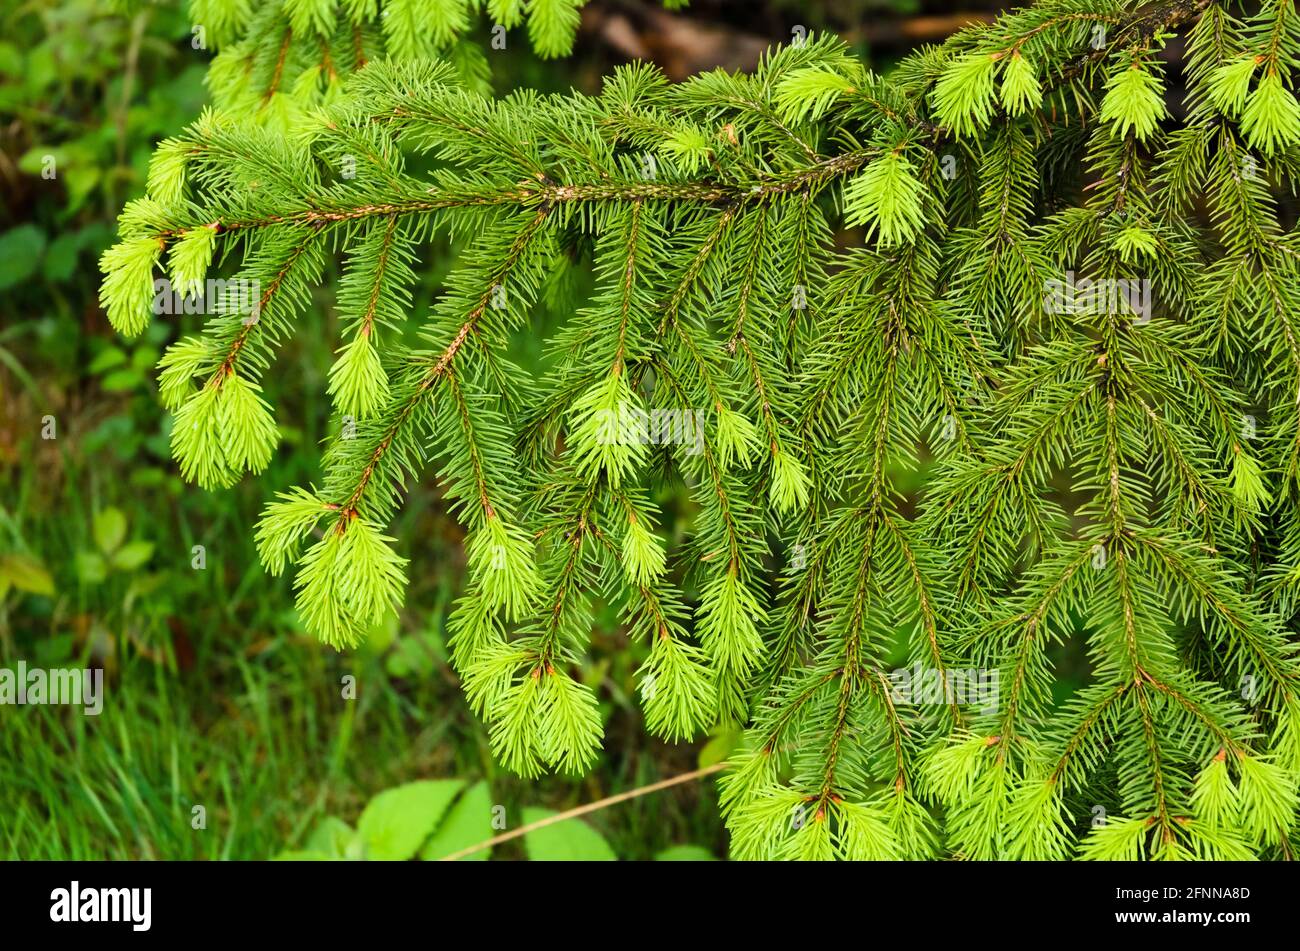 New green spruce needles, Picea, on a tree during springtime Stock Photo